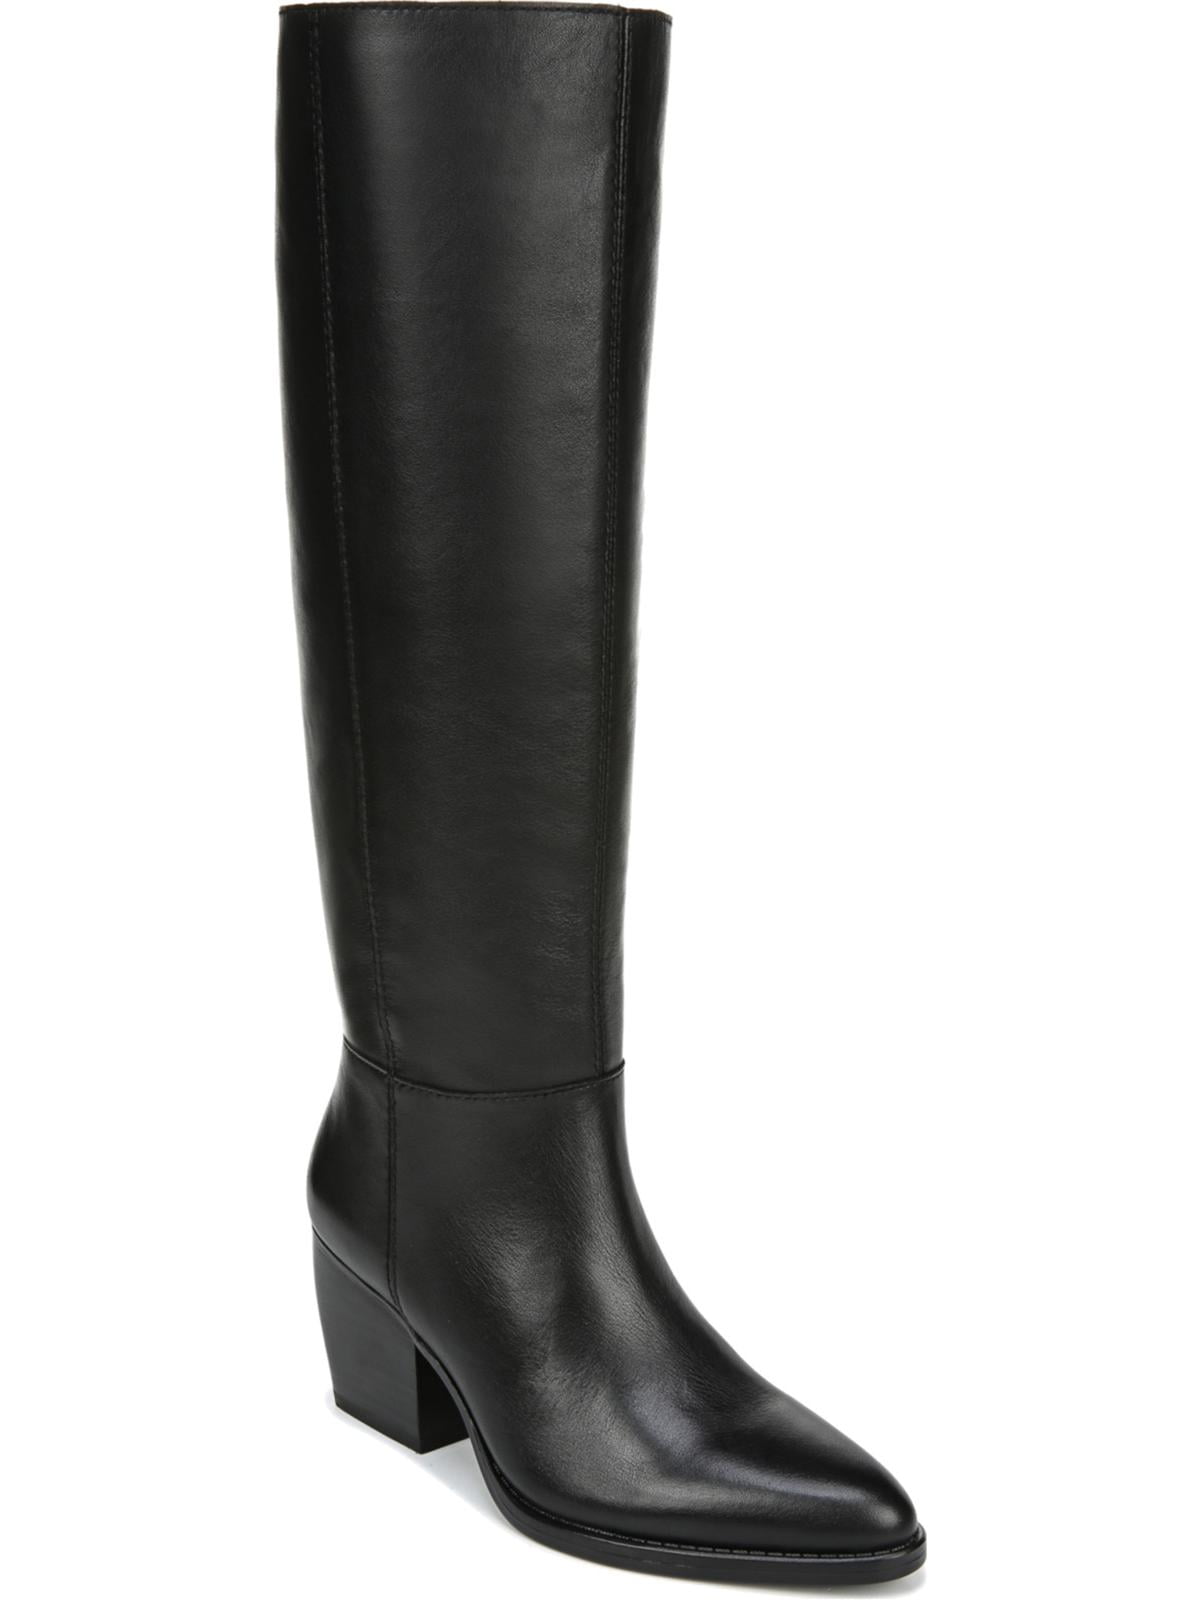 Naturalizer - Naturalizer Womens Fae WC Leather Wide Calf Knee-High ...